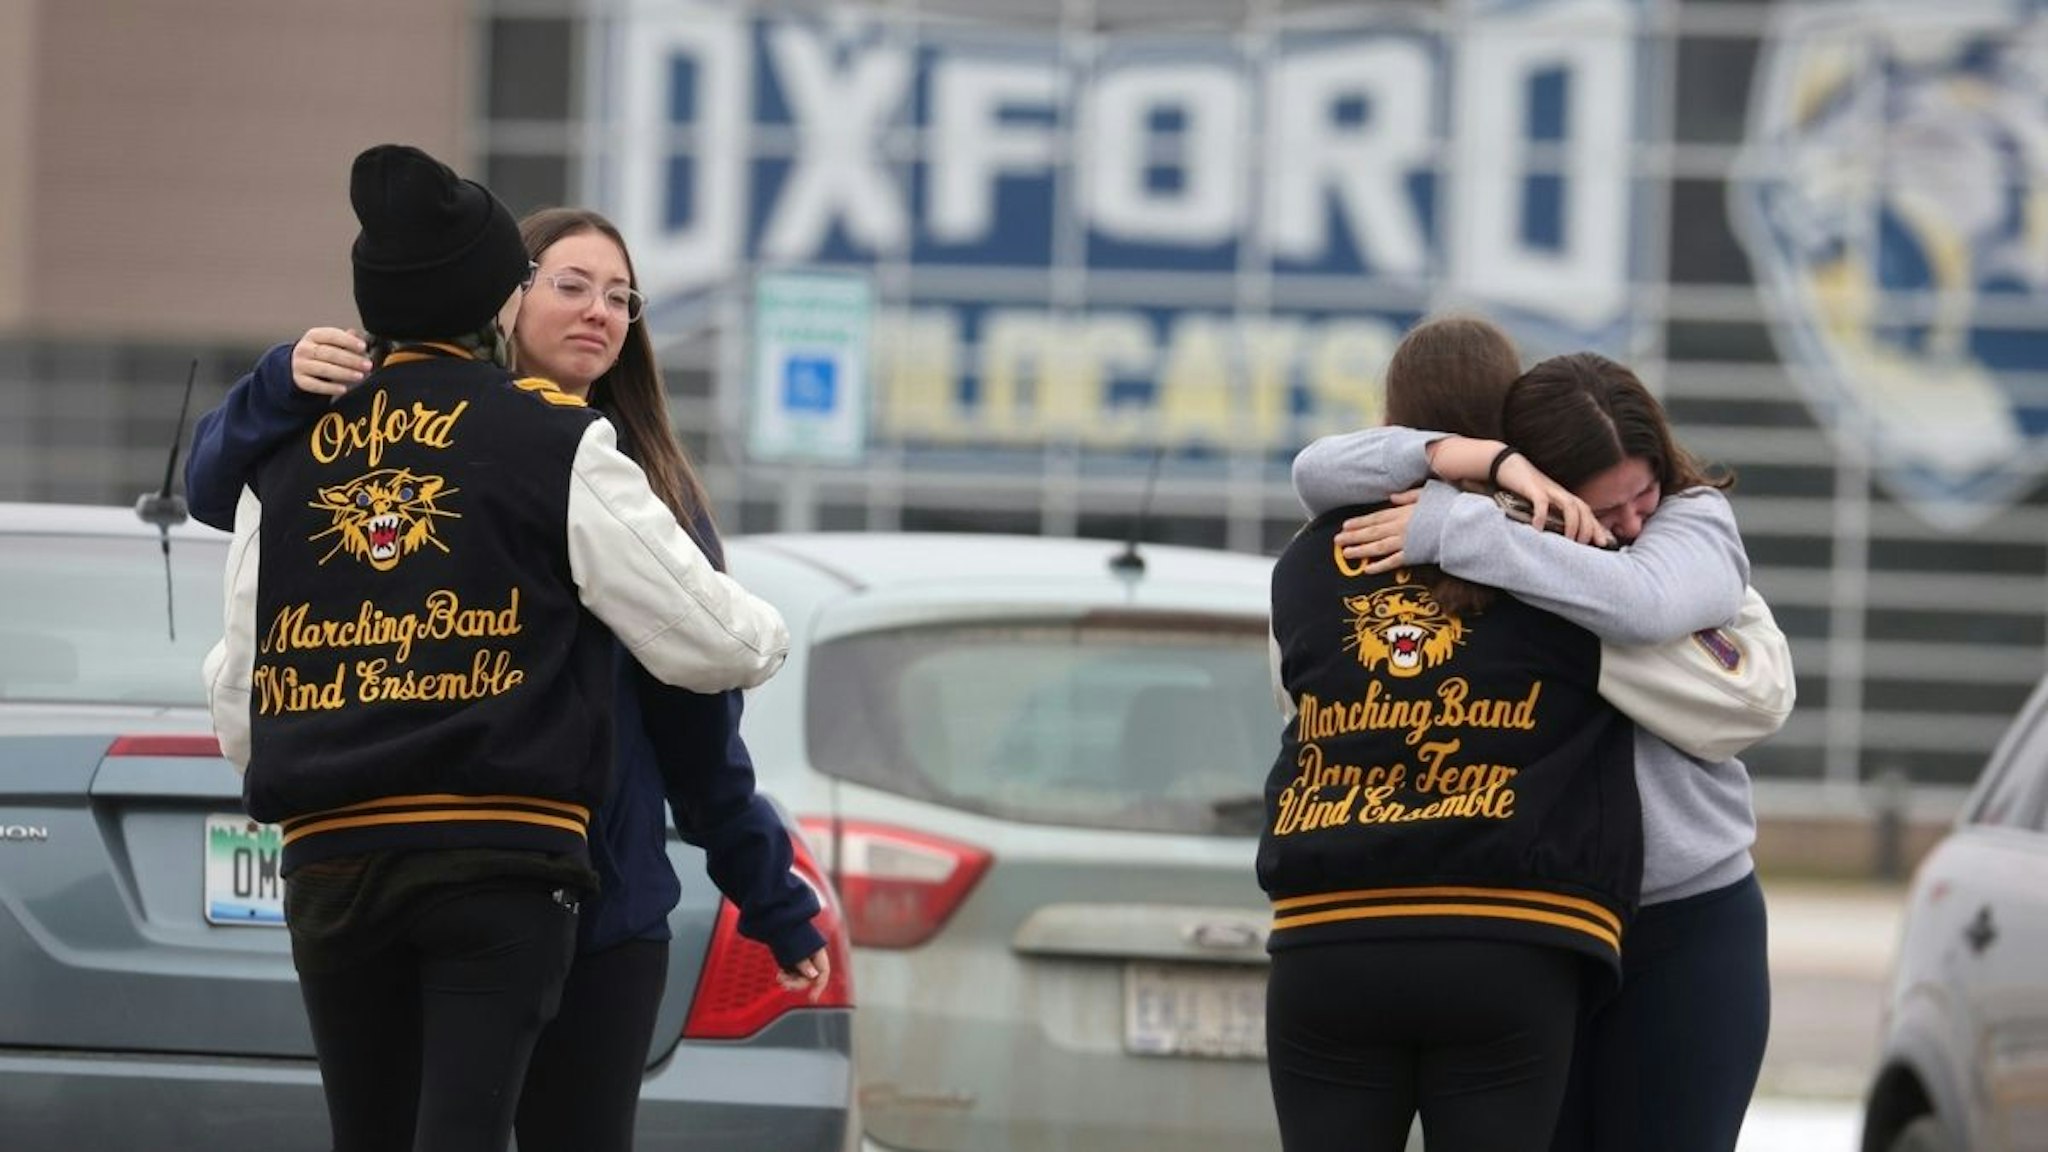 Students embrace as they return to Oxford High School on December 01, 2021 in Oxford, Michigan.